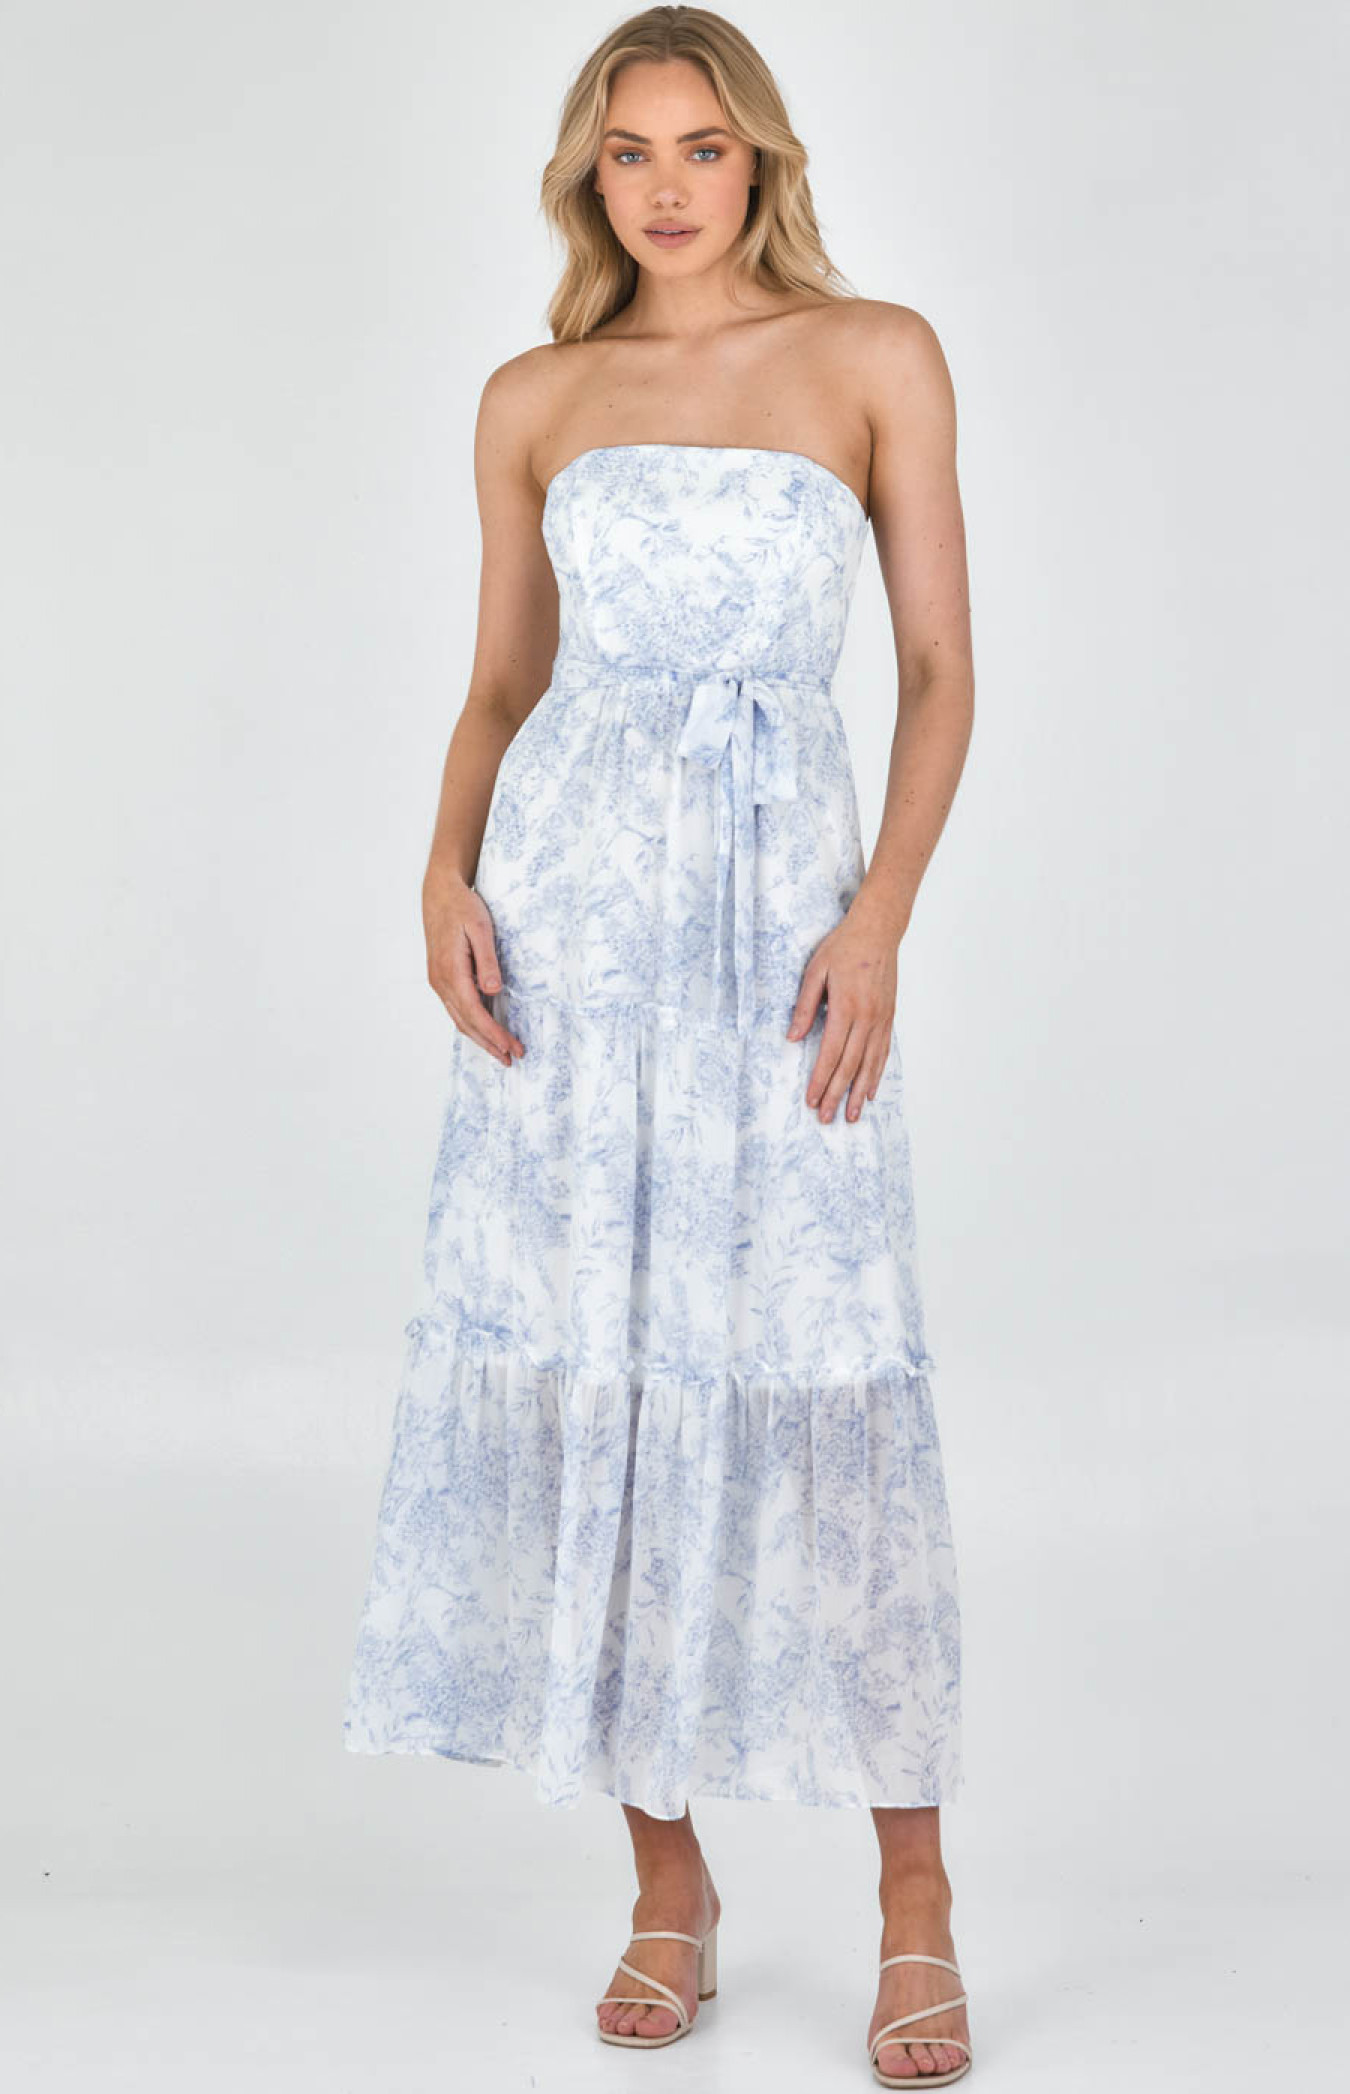 Printed Strapless Maxi Dress with Tiered Hem (SDR968B) 